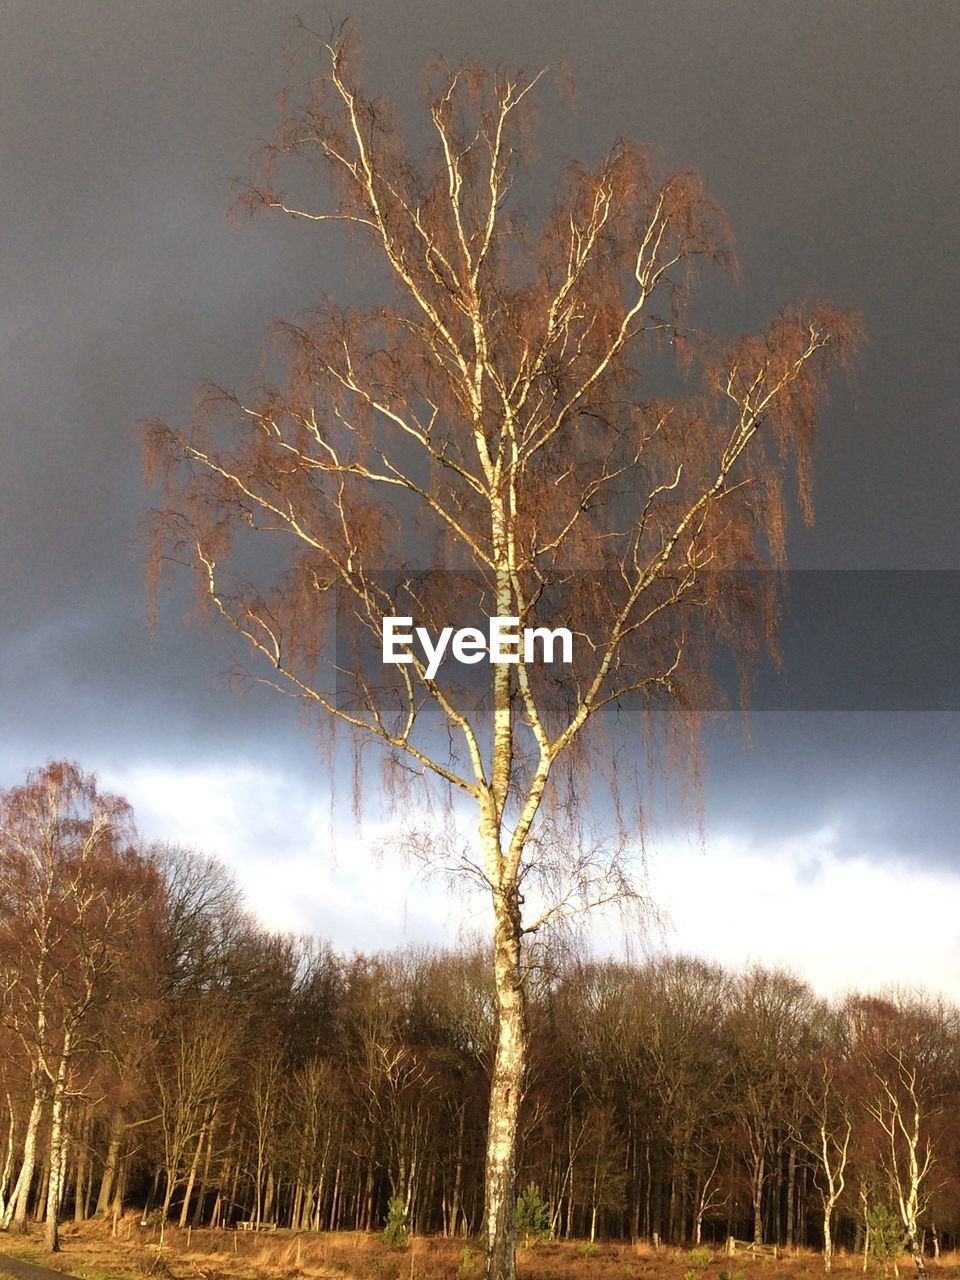 VIEW OF BARE TREE AGAINST SKY